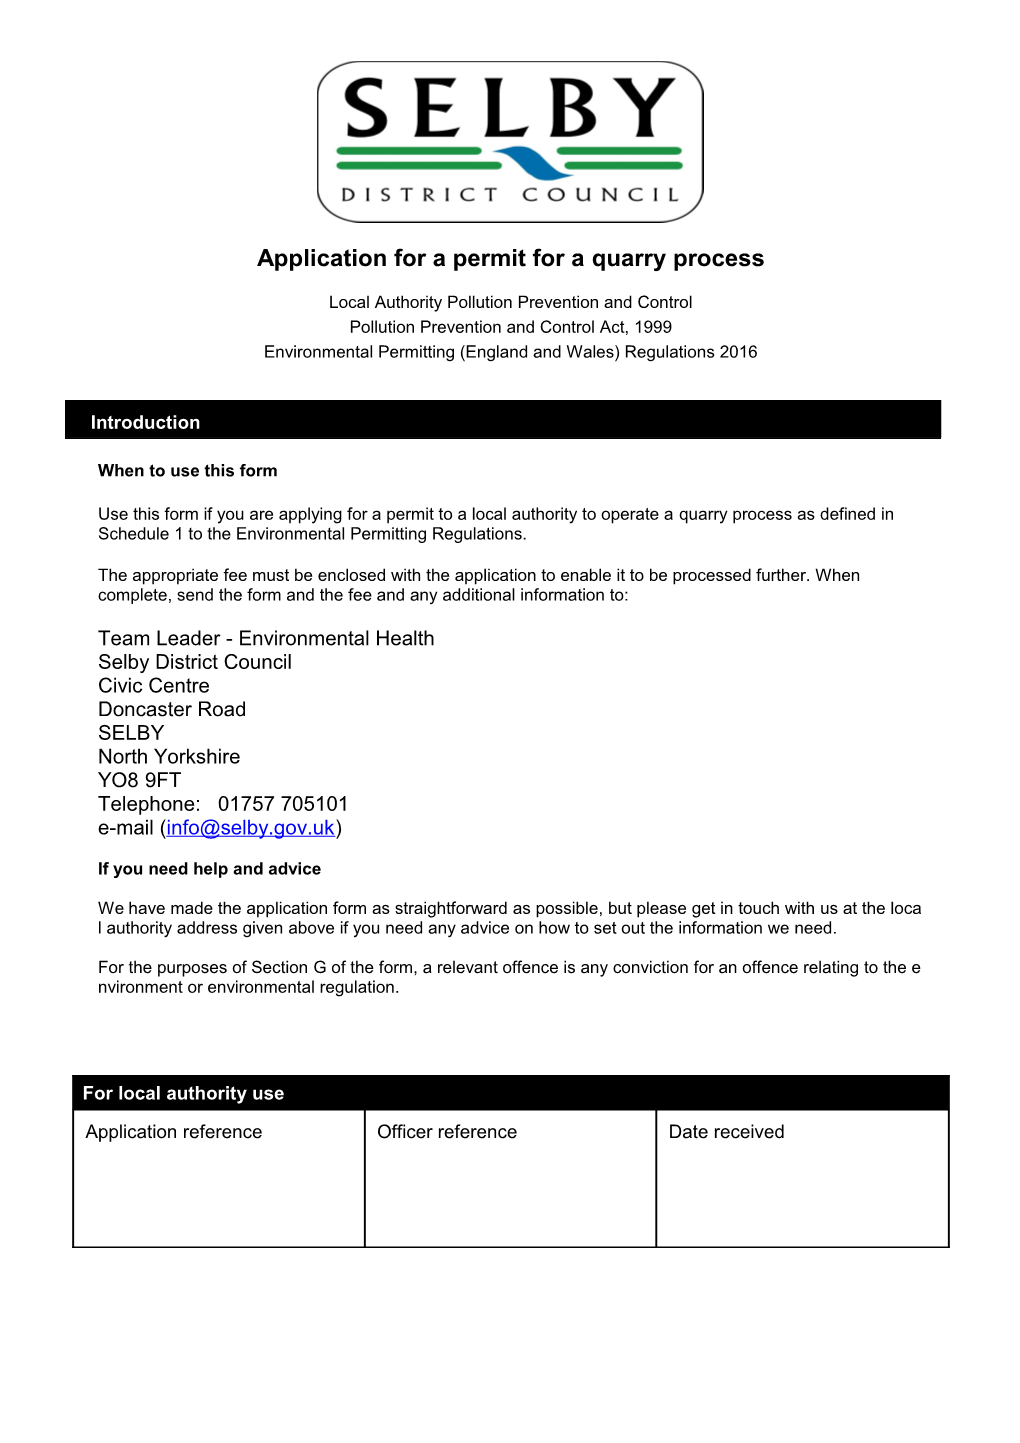 Application for a Permit for a Quarry Process